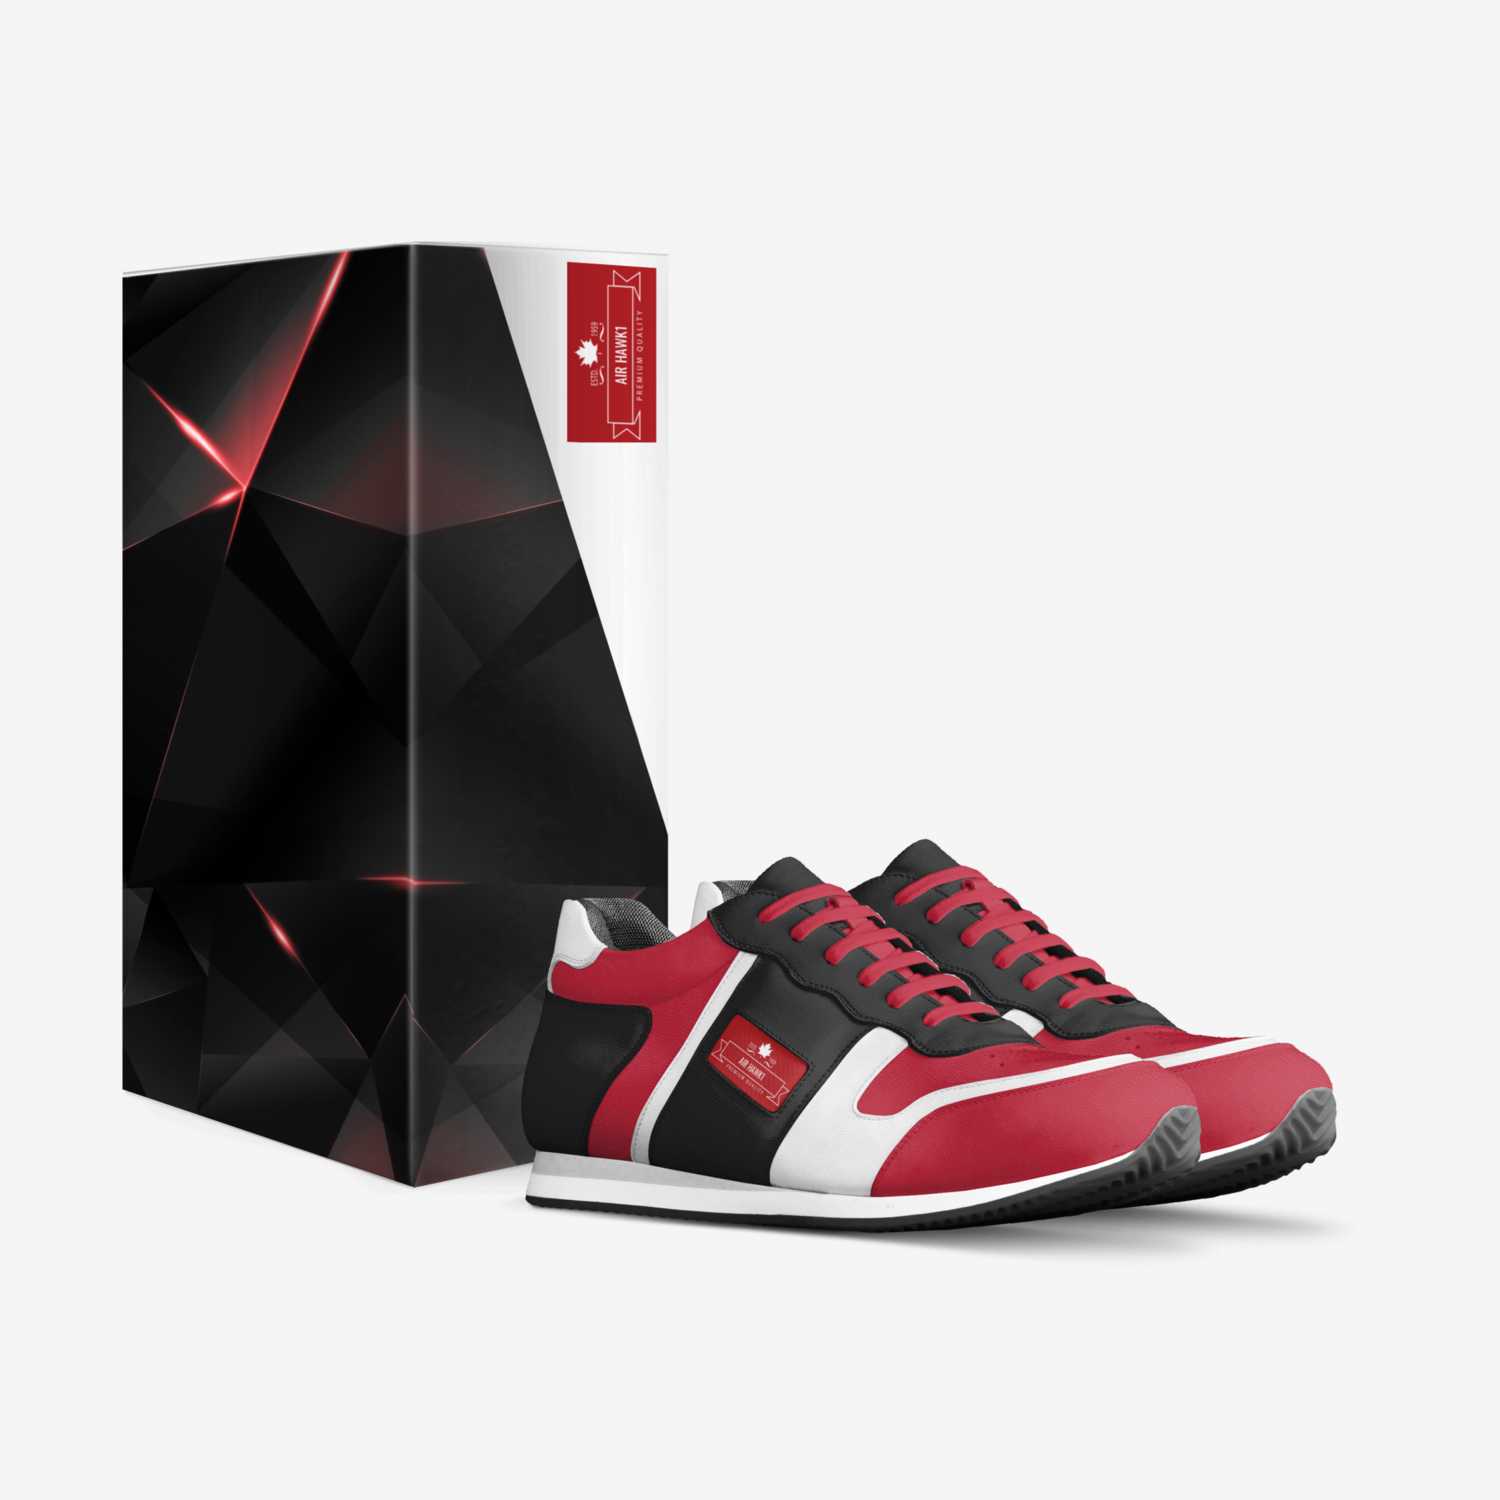 AIR HAWK1 custom made in Italy shoes by Cail Clark | Box view